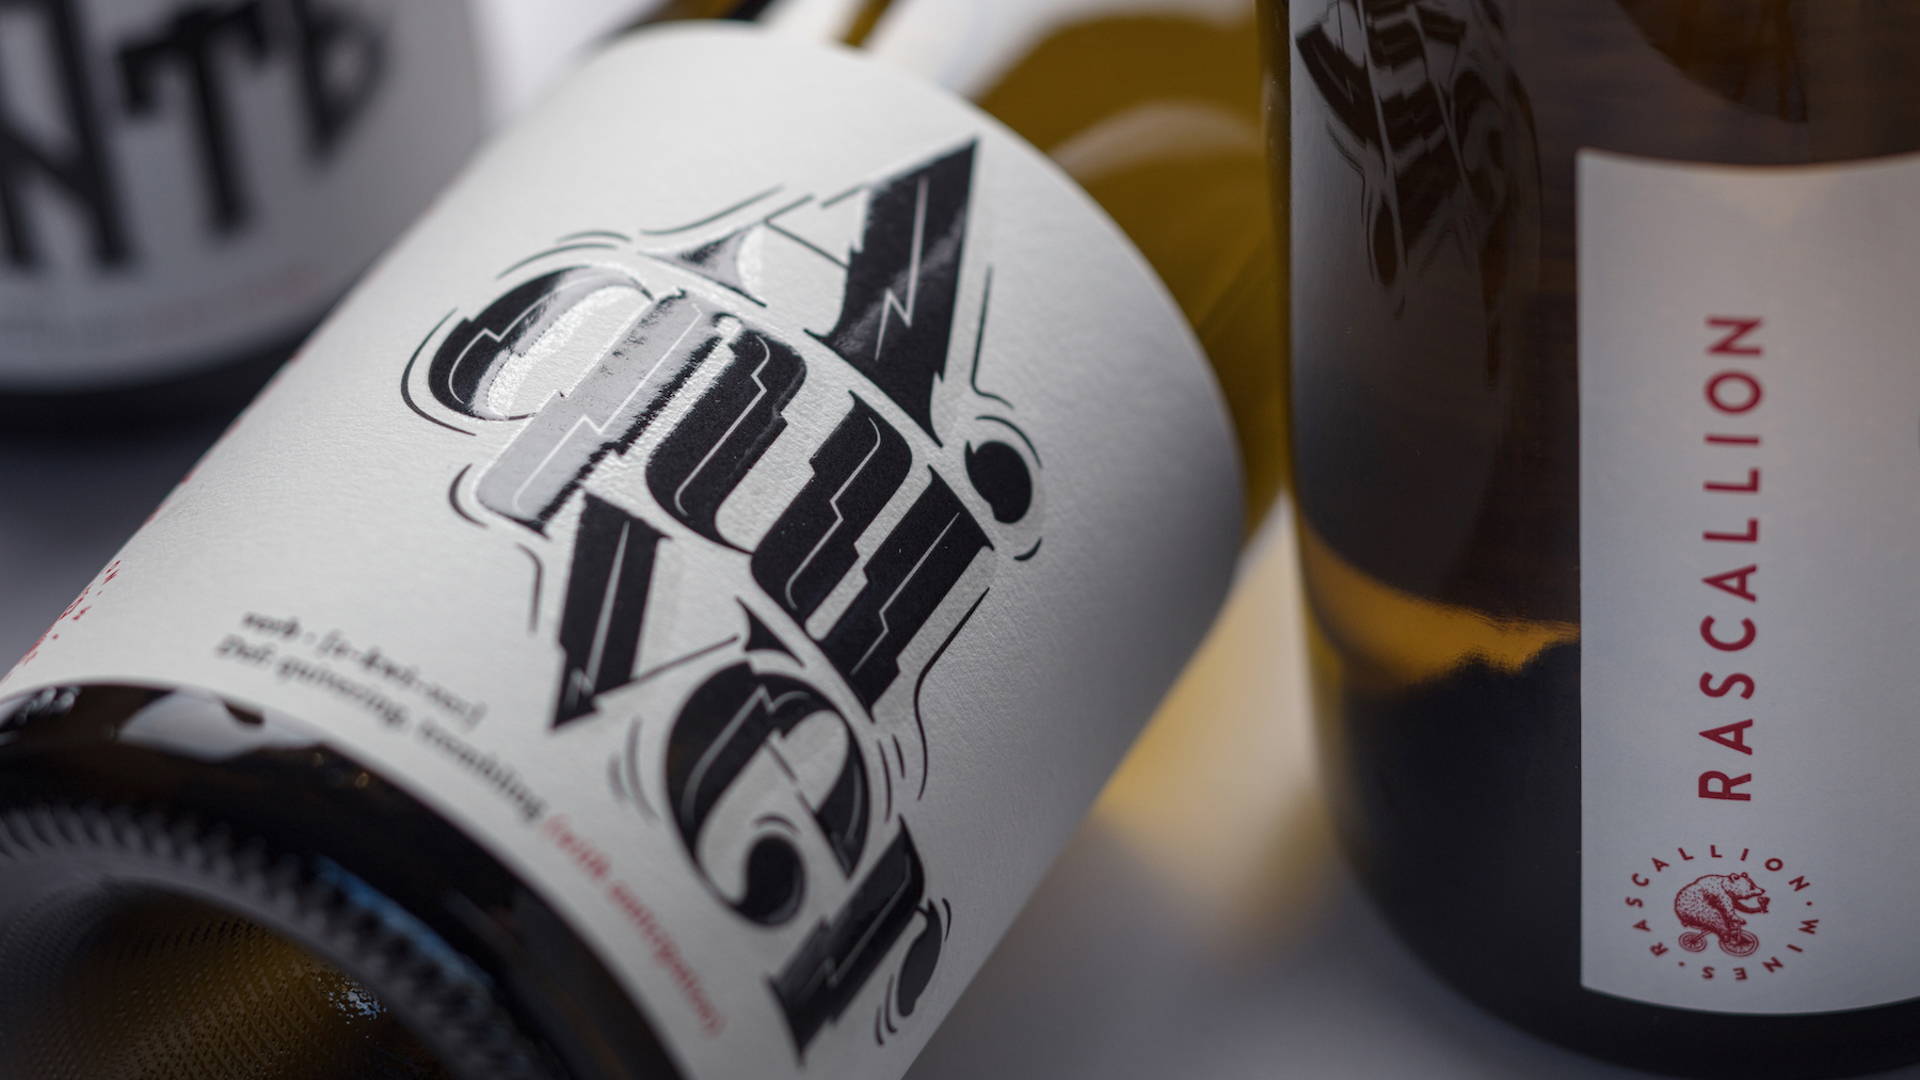 Featured image for The Typeface on These Wines Cleverly Illustrates their Meaning